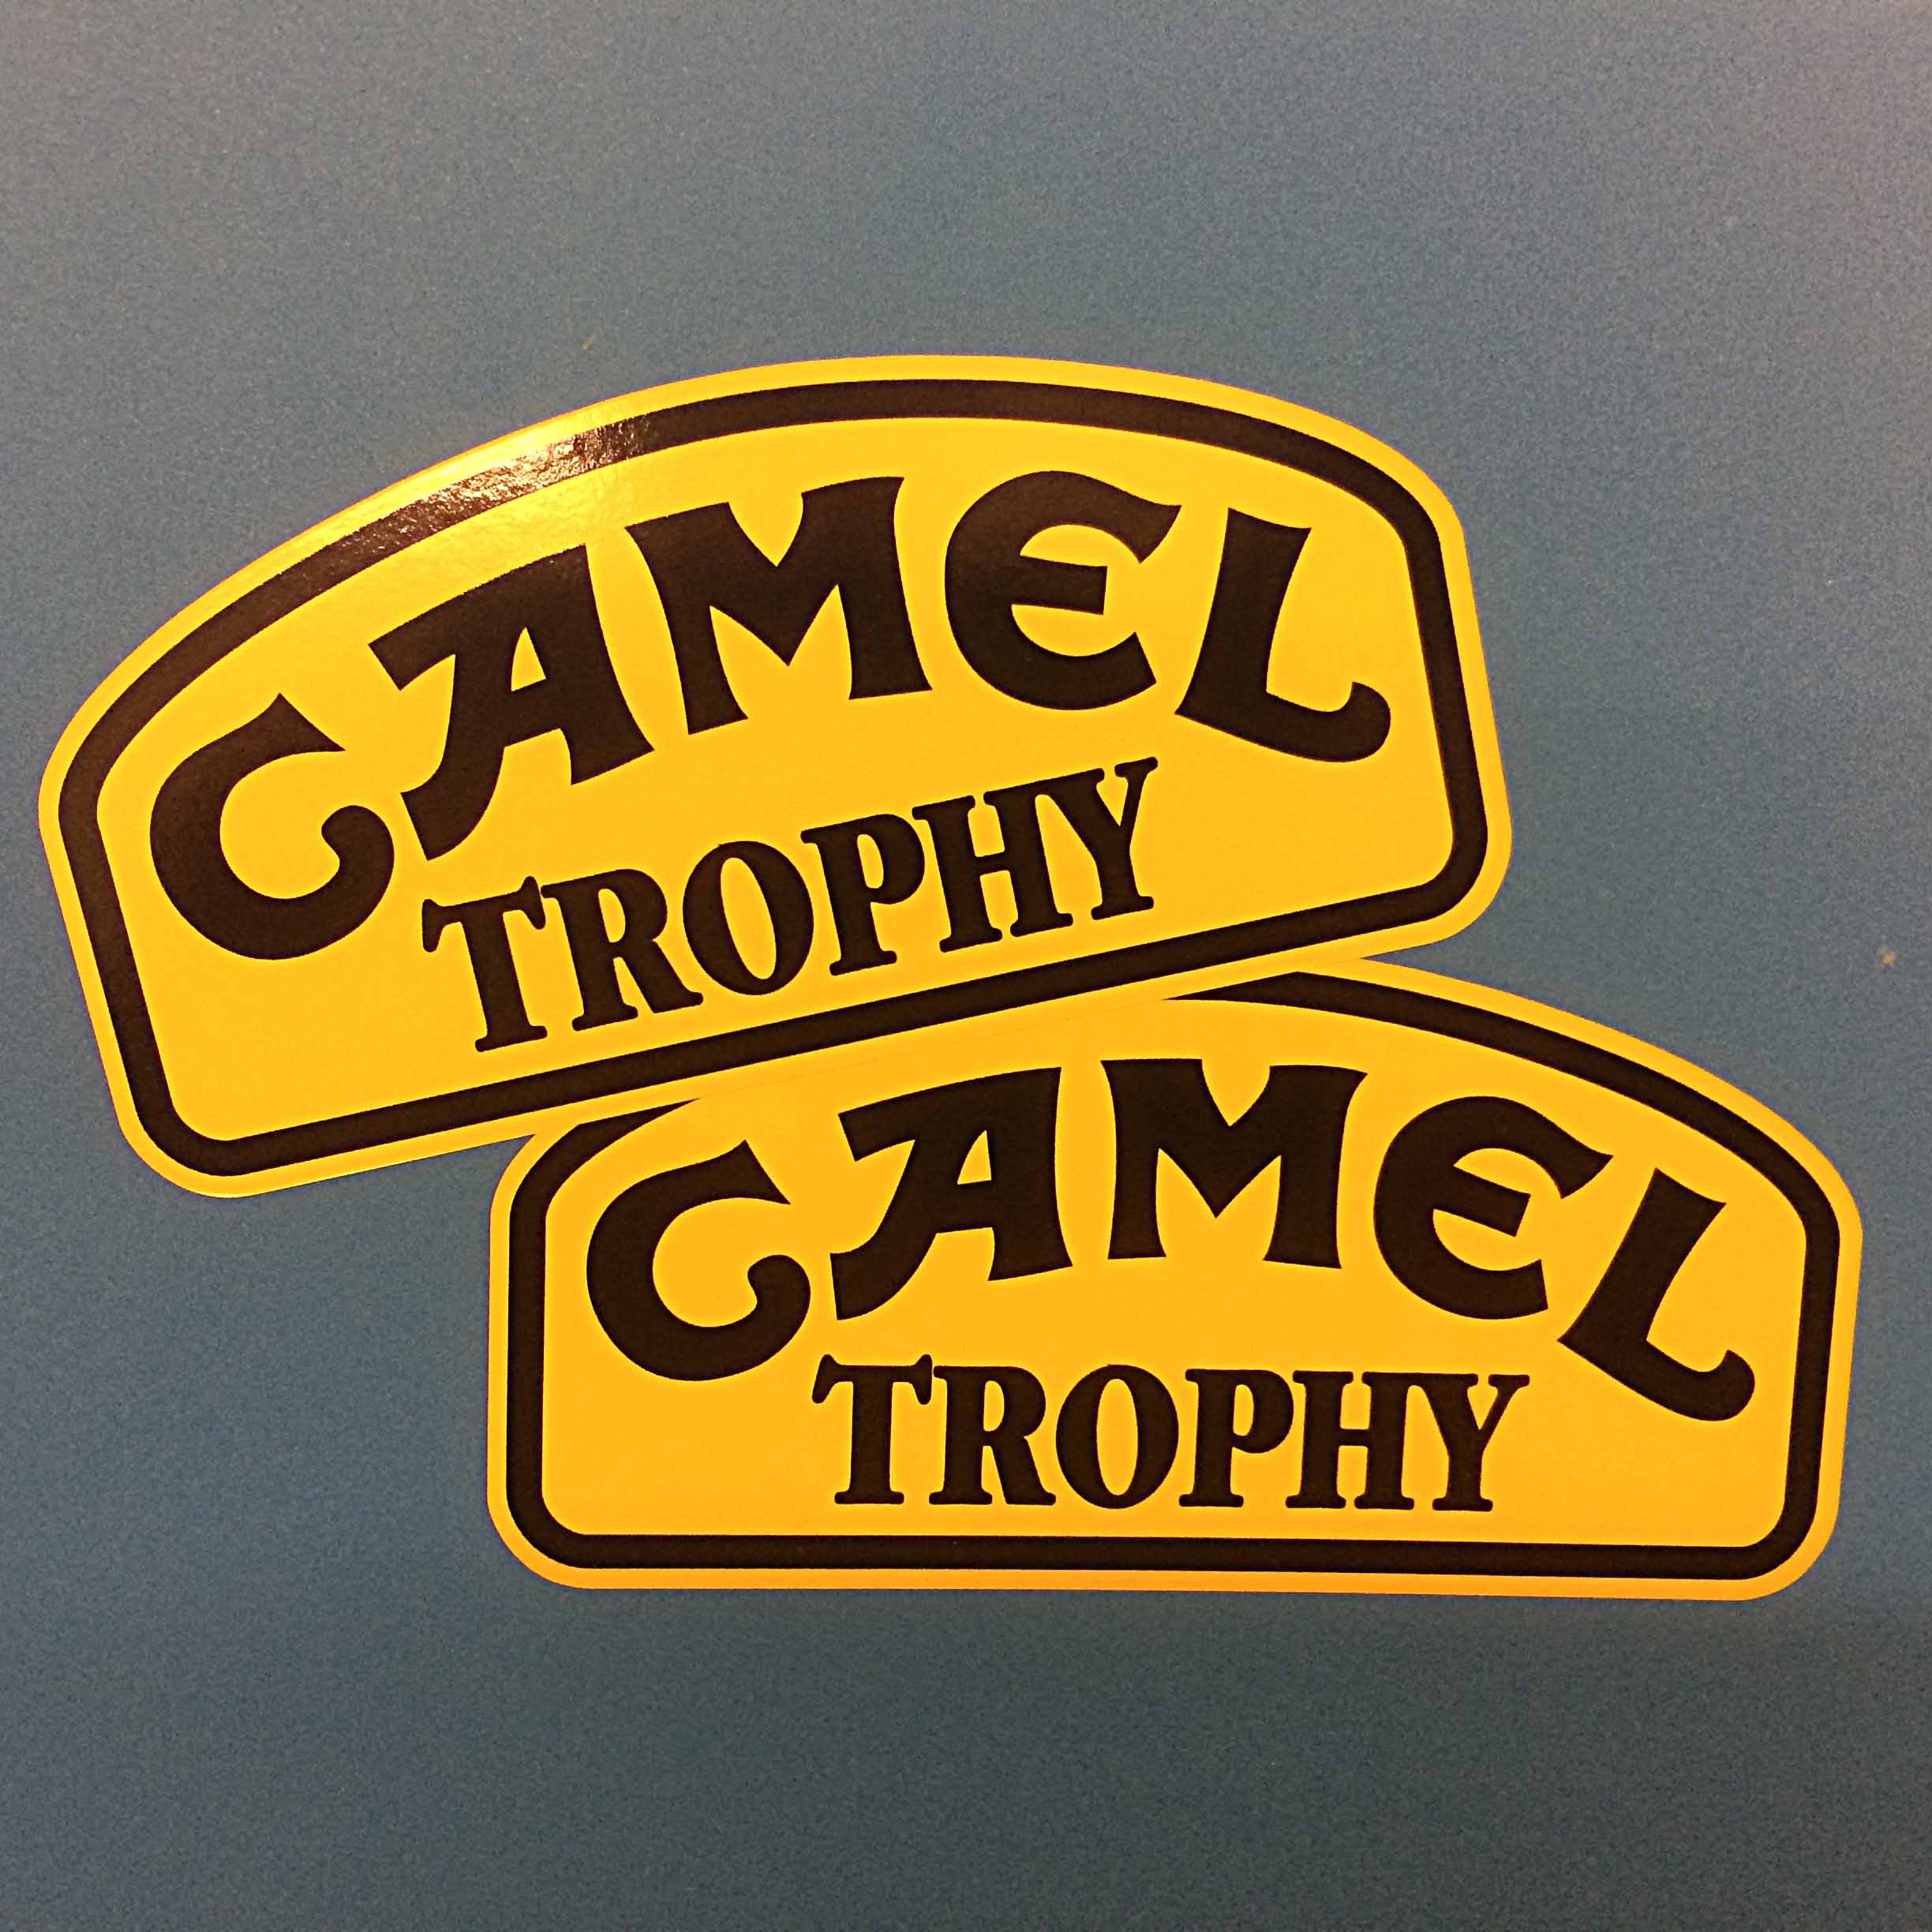 Camel Trophy in black uppercase lettering on a yellow sticker with a black border. The top edge of the sticker is curved.